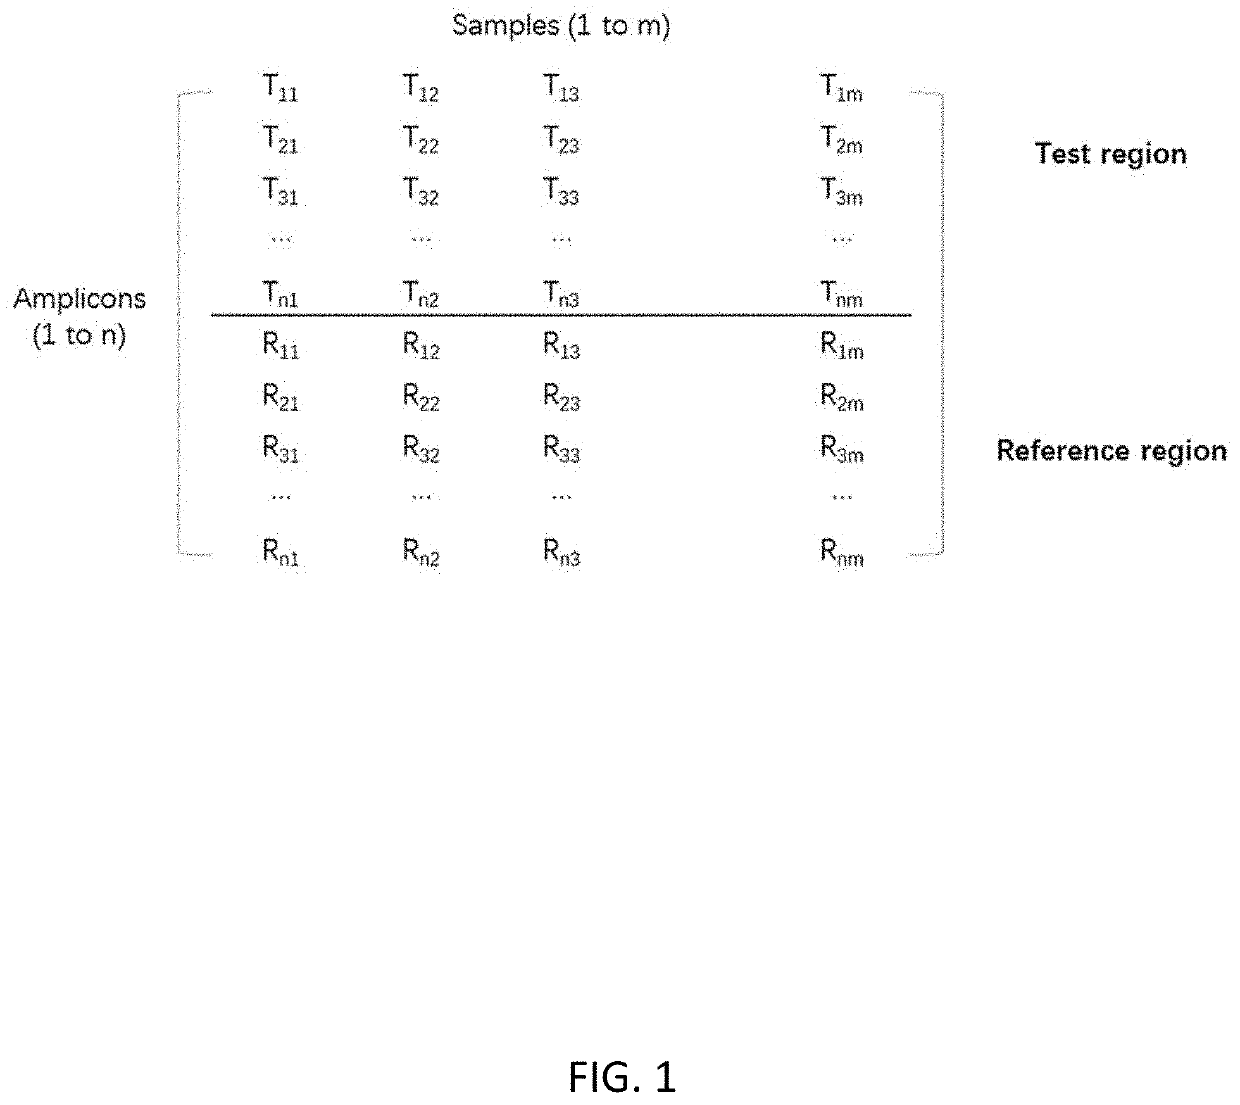 Method of correcting amplification bias in amplicon sequencing